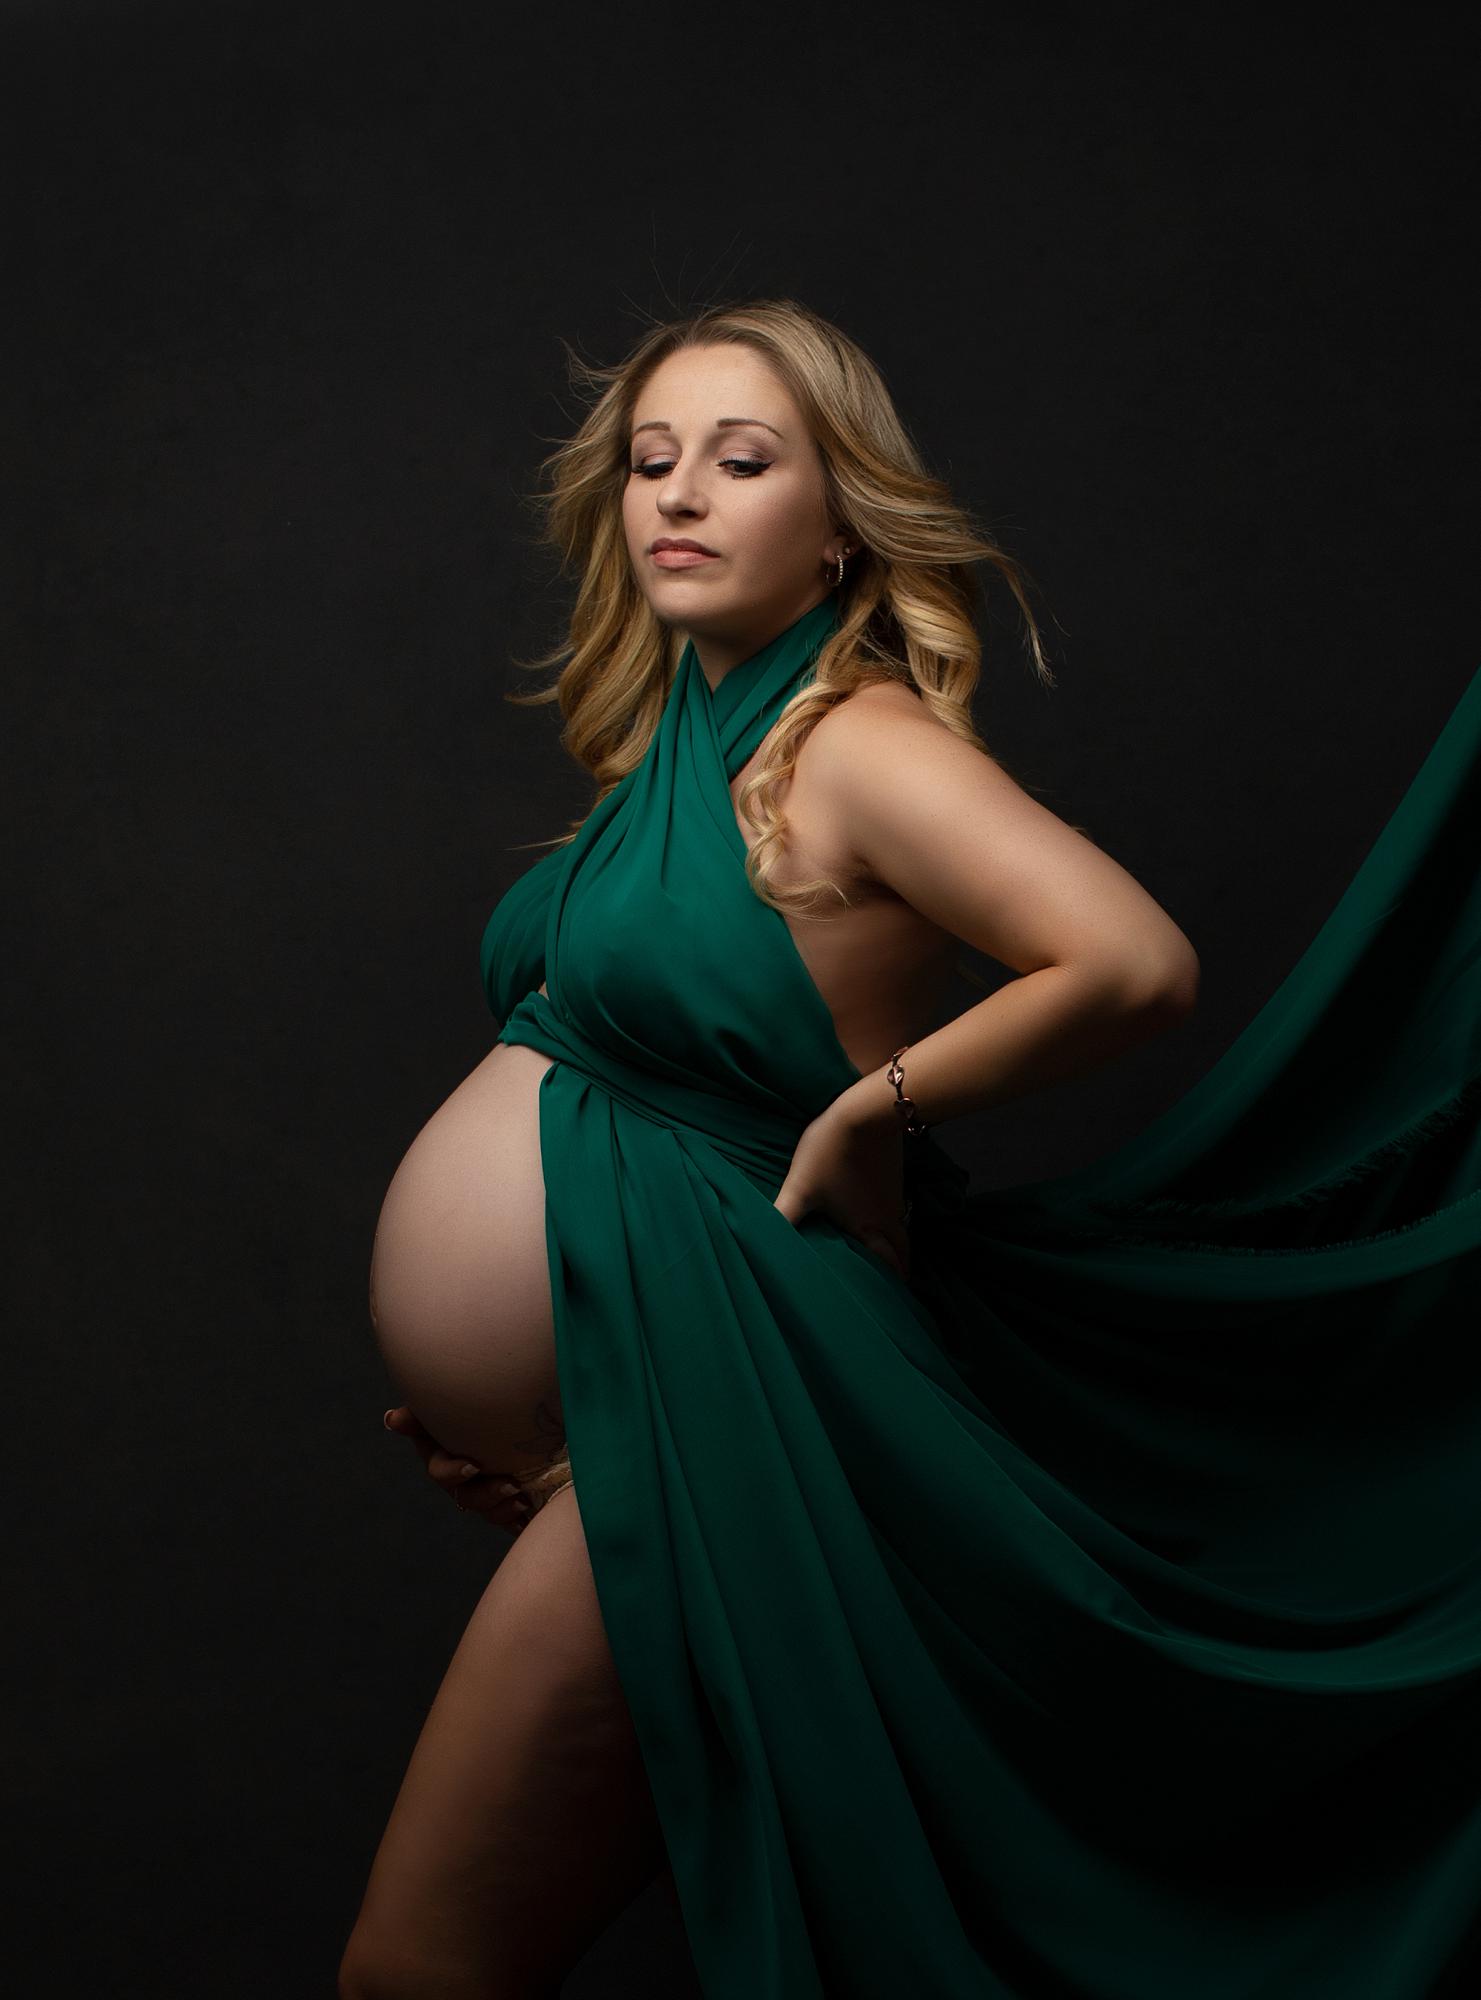 Pregnant woman posing against a black backdrop with flowing green material for a maternity photoshoot in Suffolk photography studio